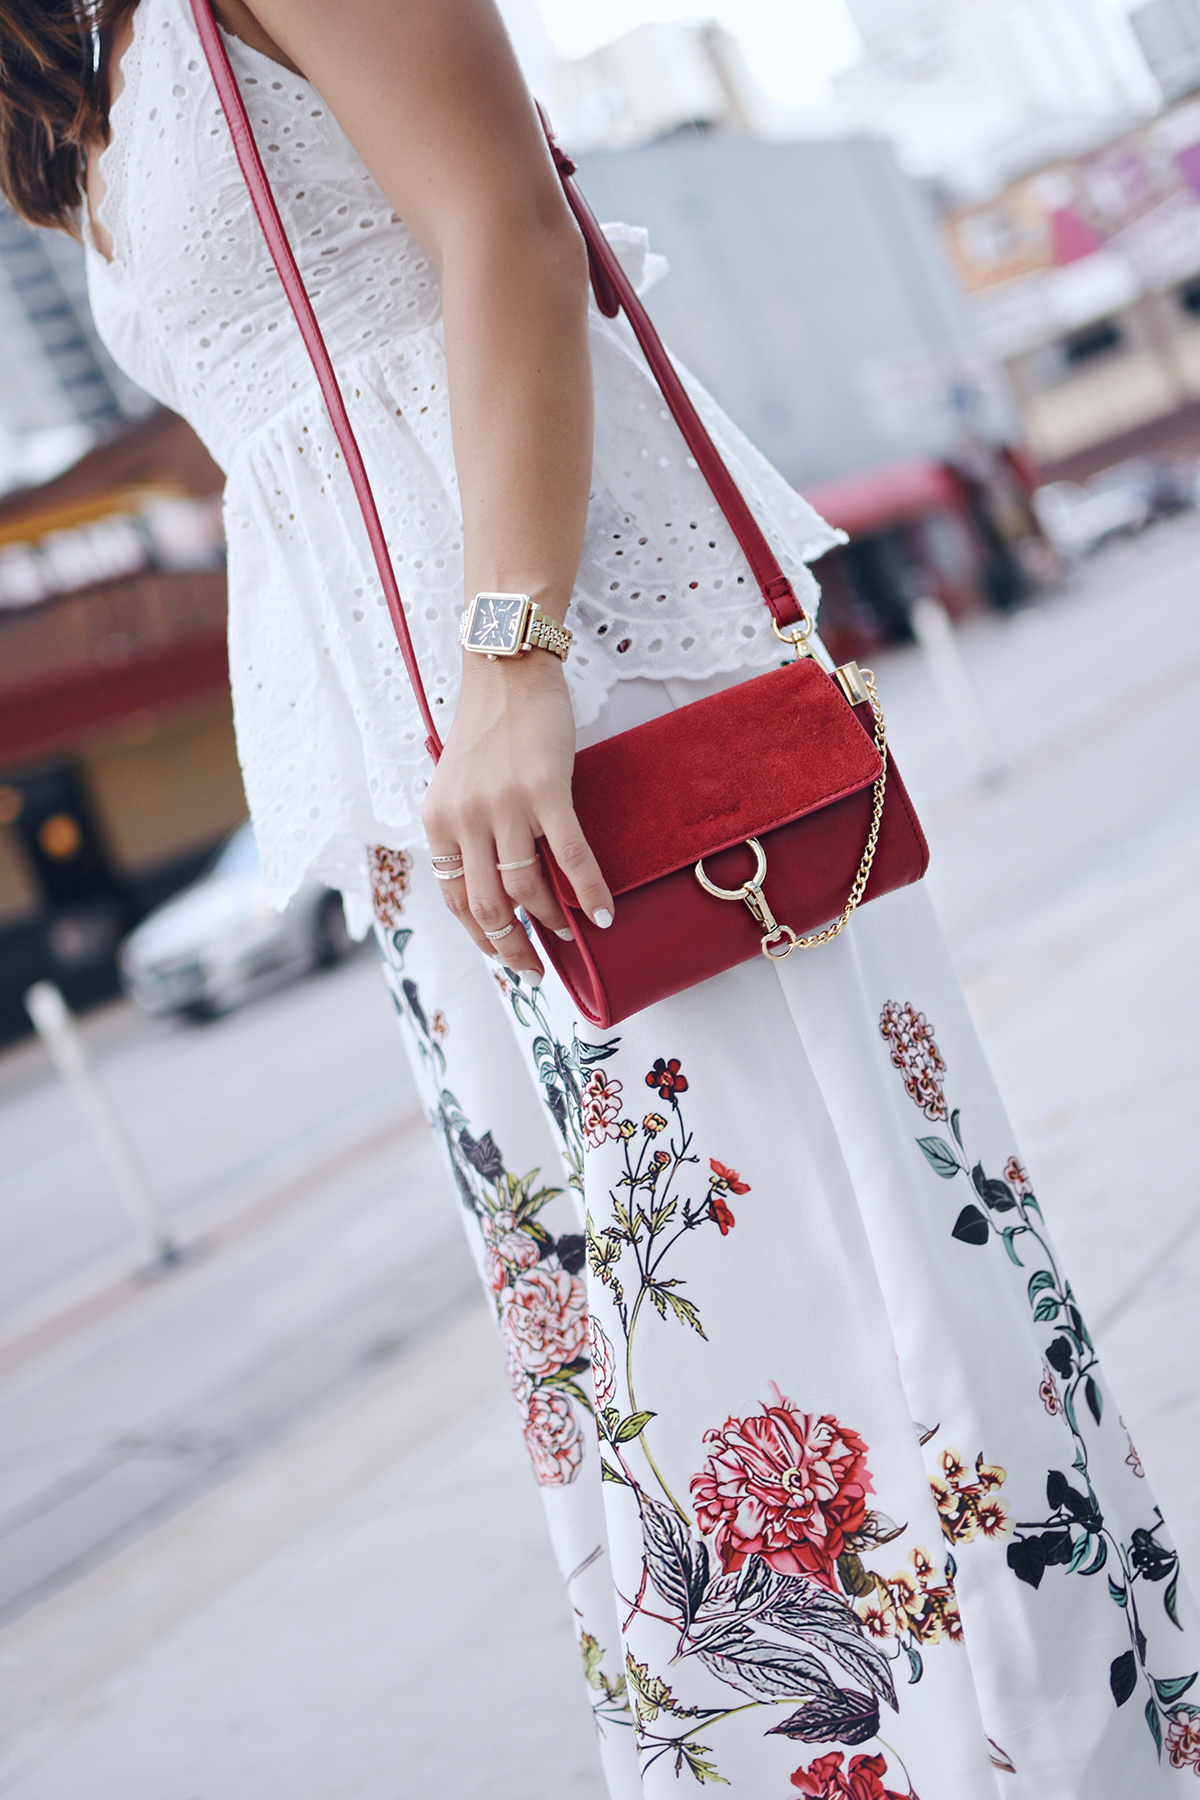 Carolina Hellal of Chic Talk wearing Shein floral pants, white open back top, Public Desire sandals and Moda Luxe bag